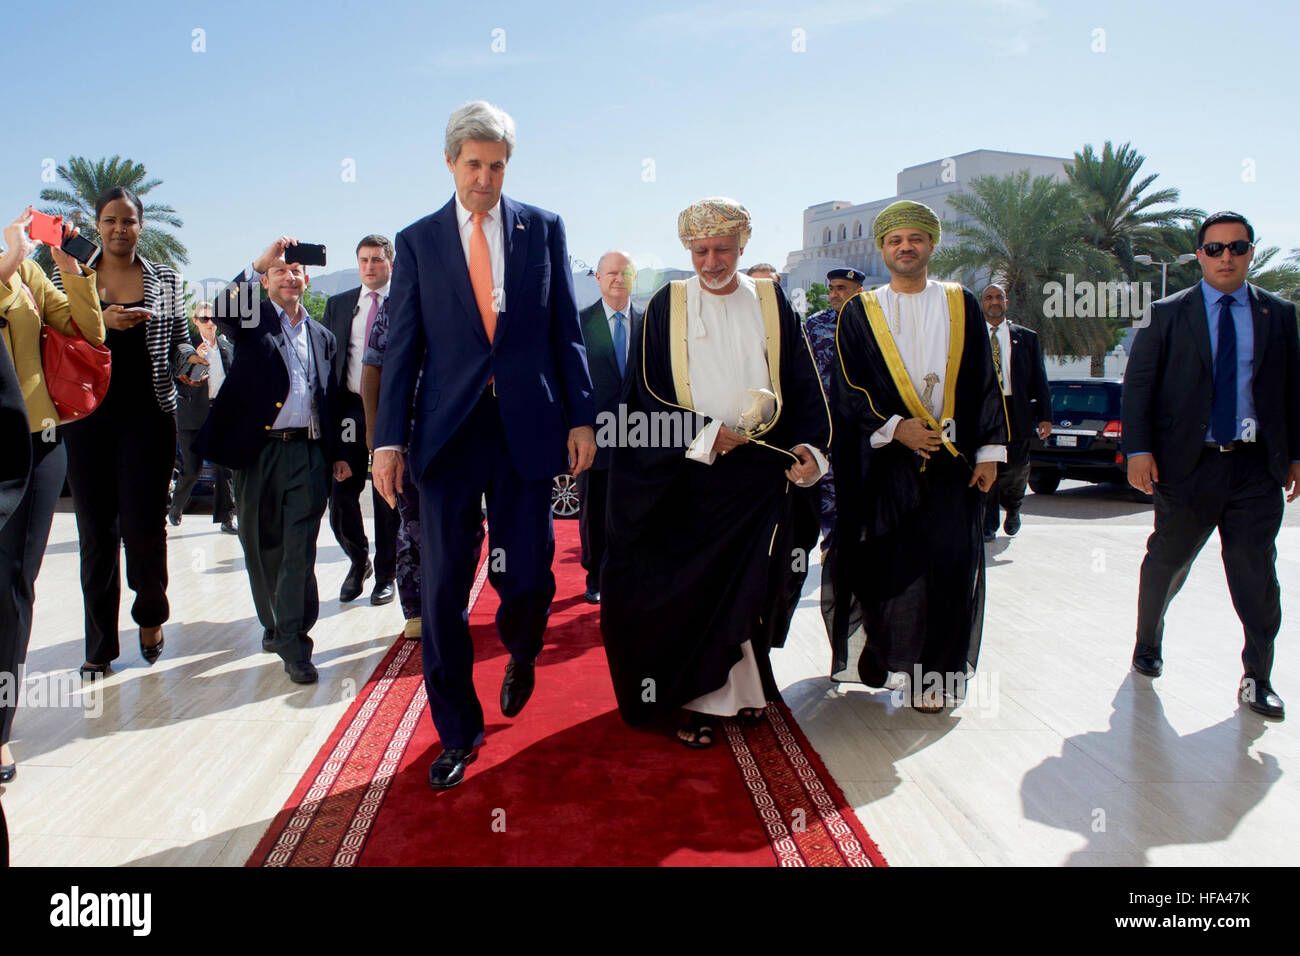 Omani Foreign Minister Yusuf bin Alawi escorts U.S. Secretary of State John Kerry as he arrives at the Ministry of Foreign Affairs in Muscat, Oman, for a bilateral meeting preceding a conversation with Sultan Qaboos on November 14, 2016. Stock Photo